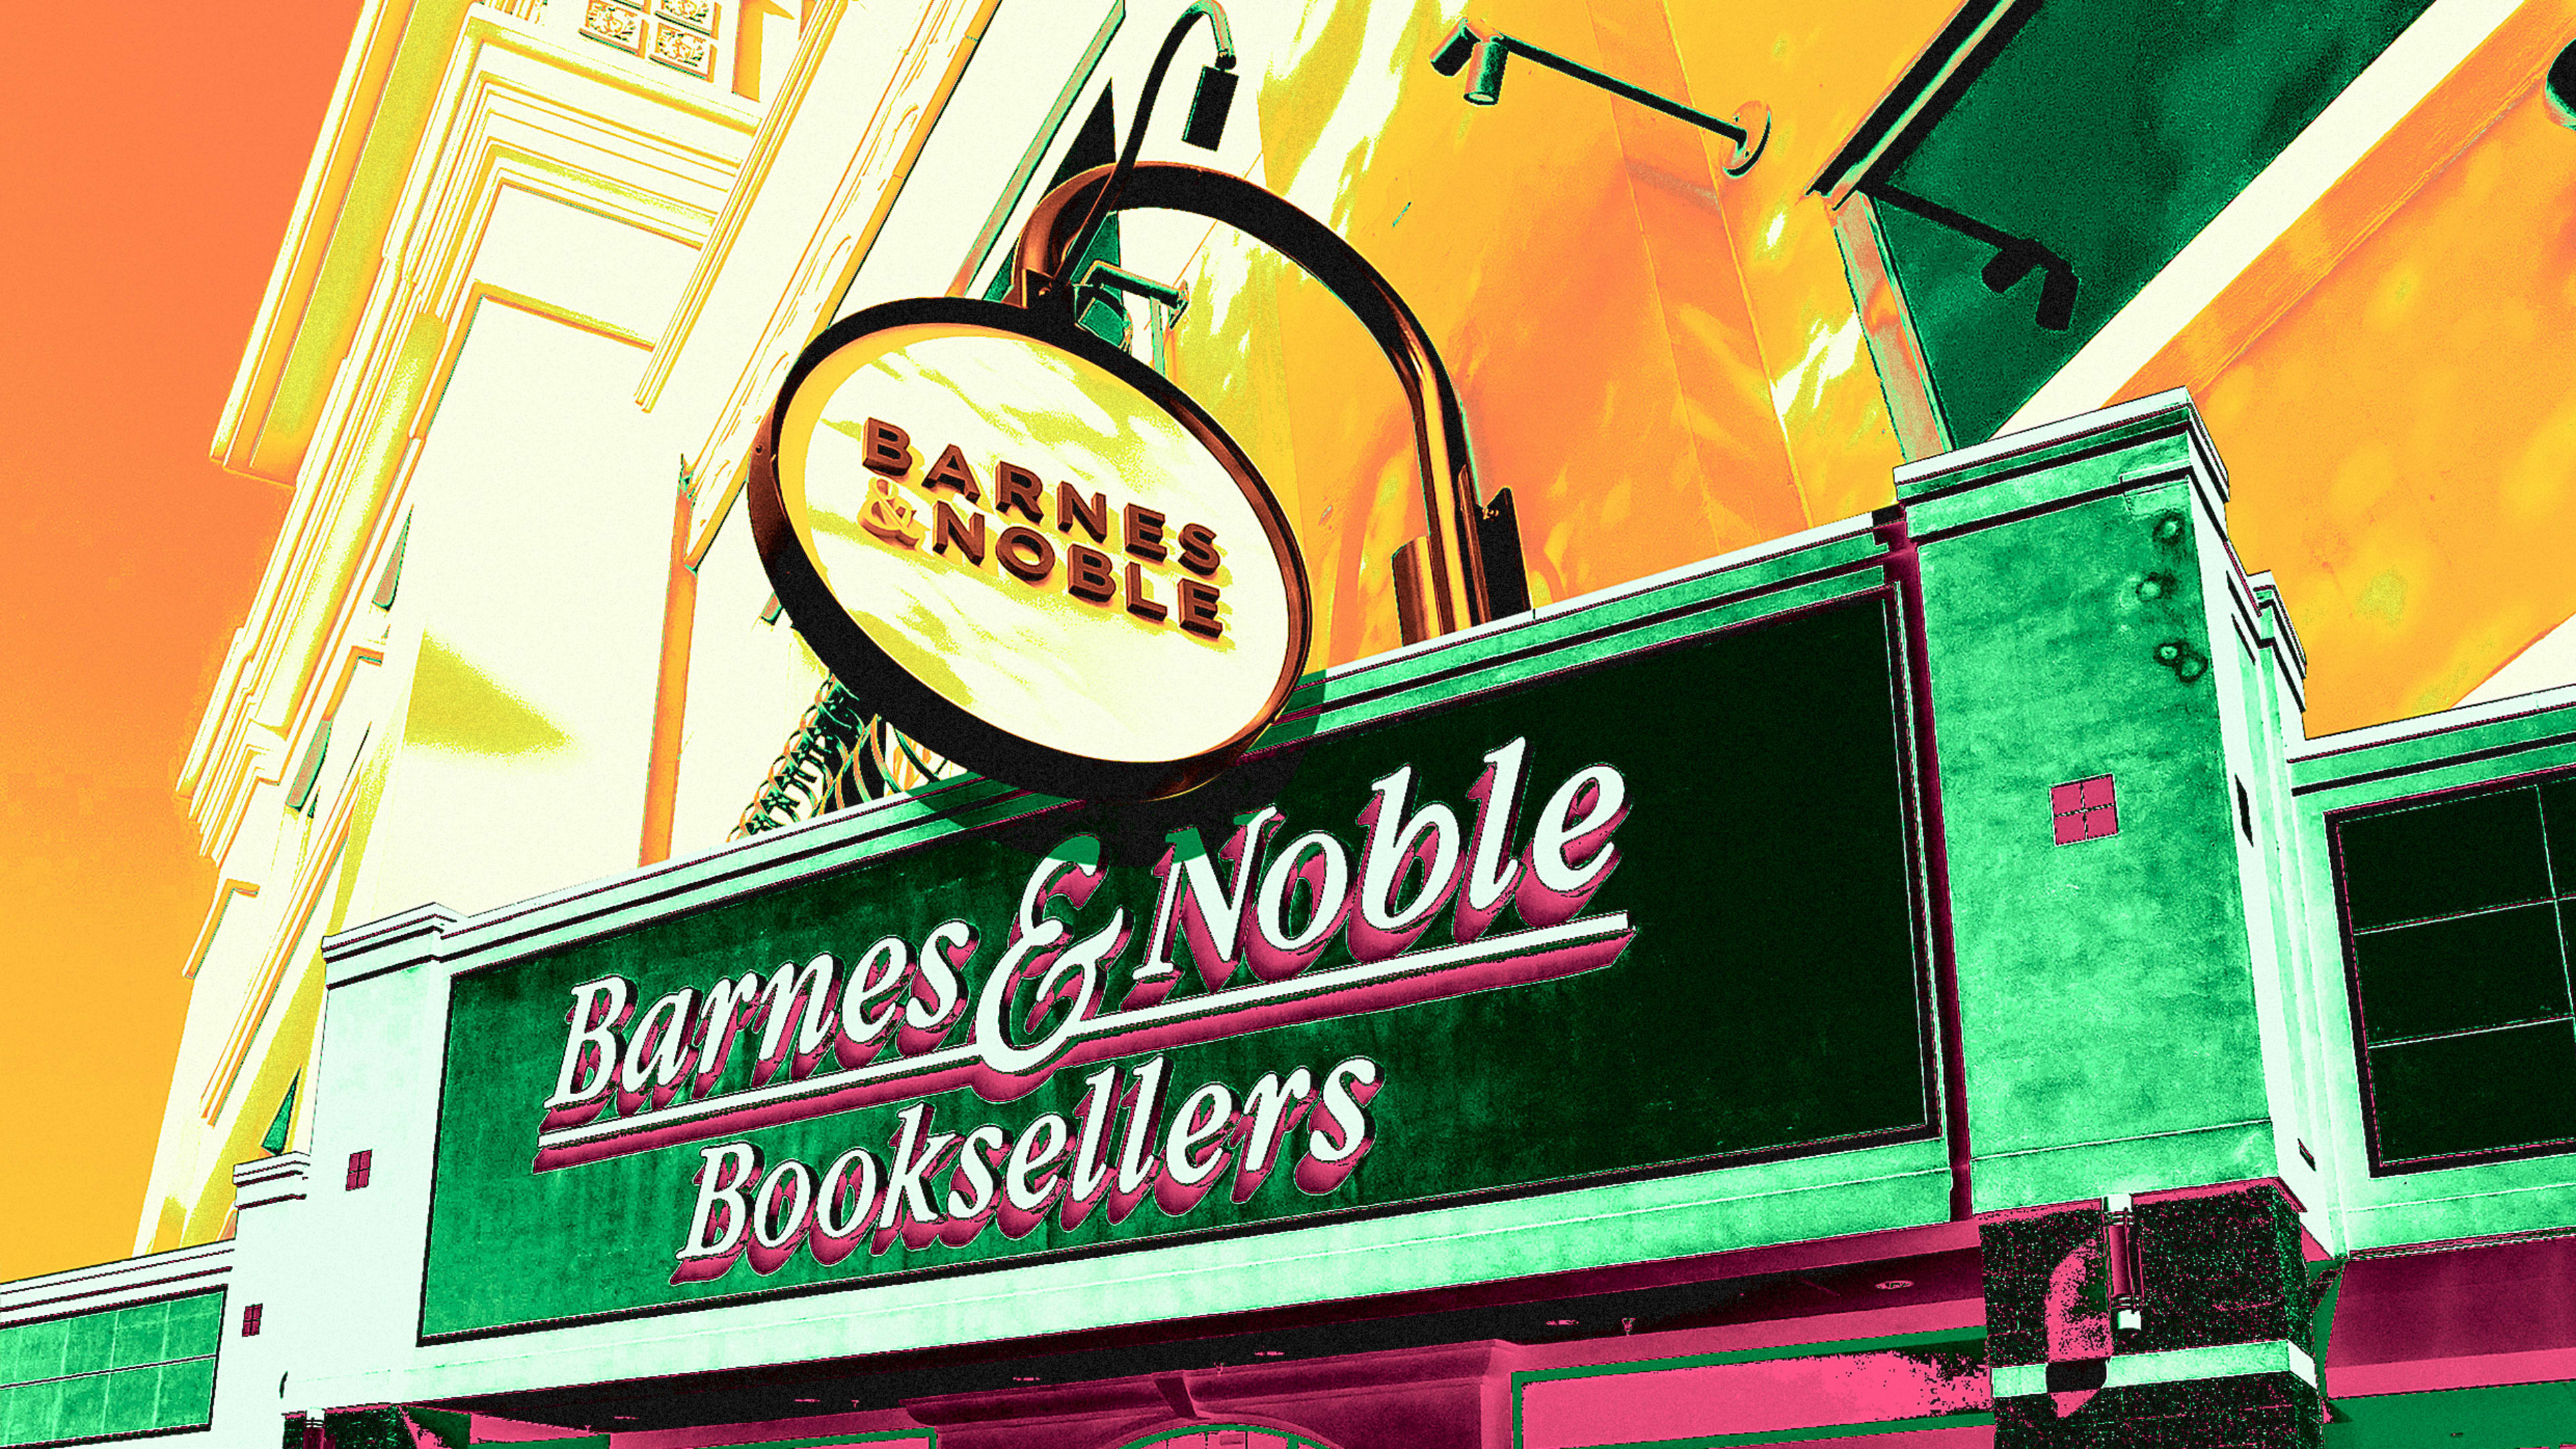 How Barnes & Noble transformed its brand from corporate bully to lovable neighborhood bookstore